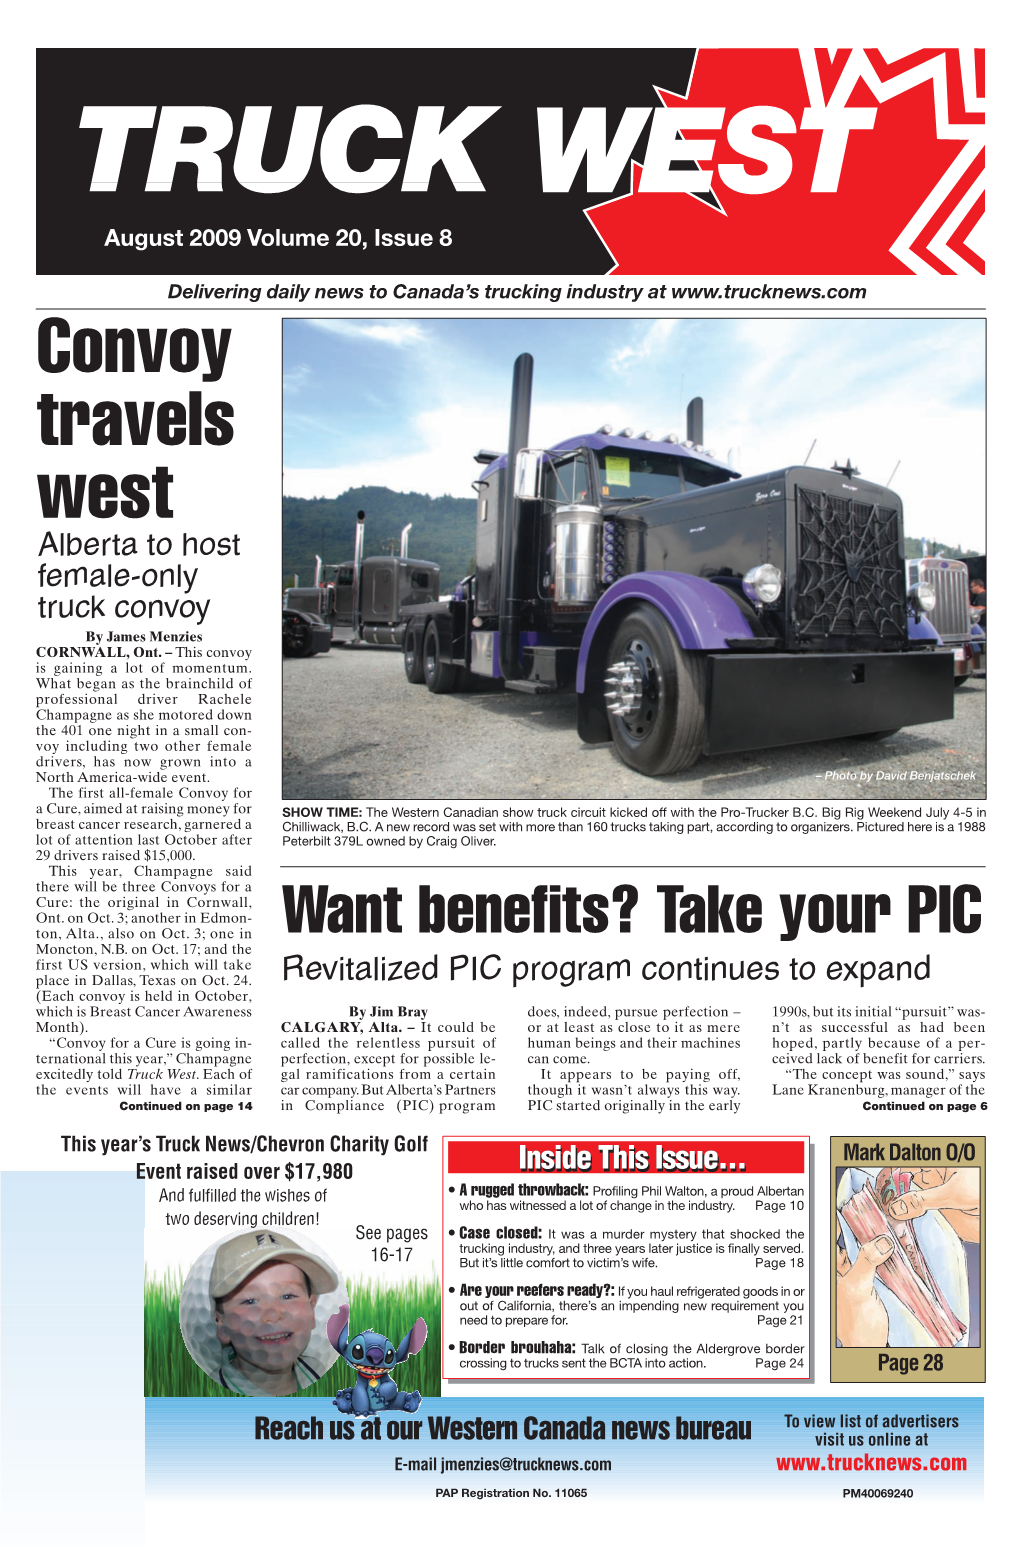 Convoy Travels West Alberta to Host Female-Only Truck Convoy by James Menzies CORNWALL, Ont